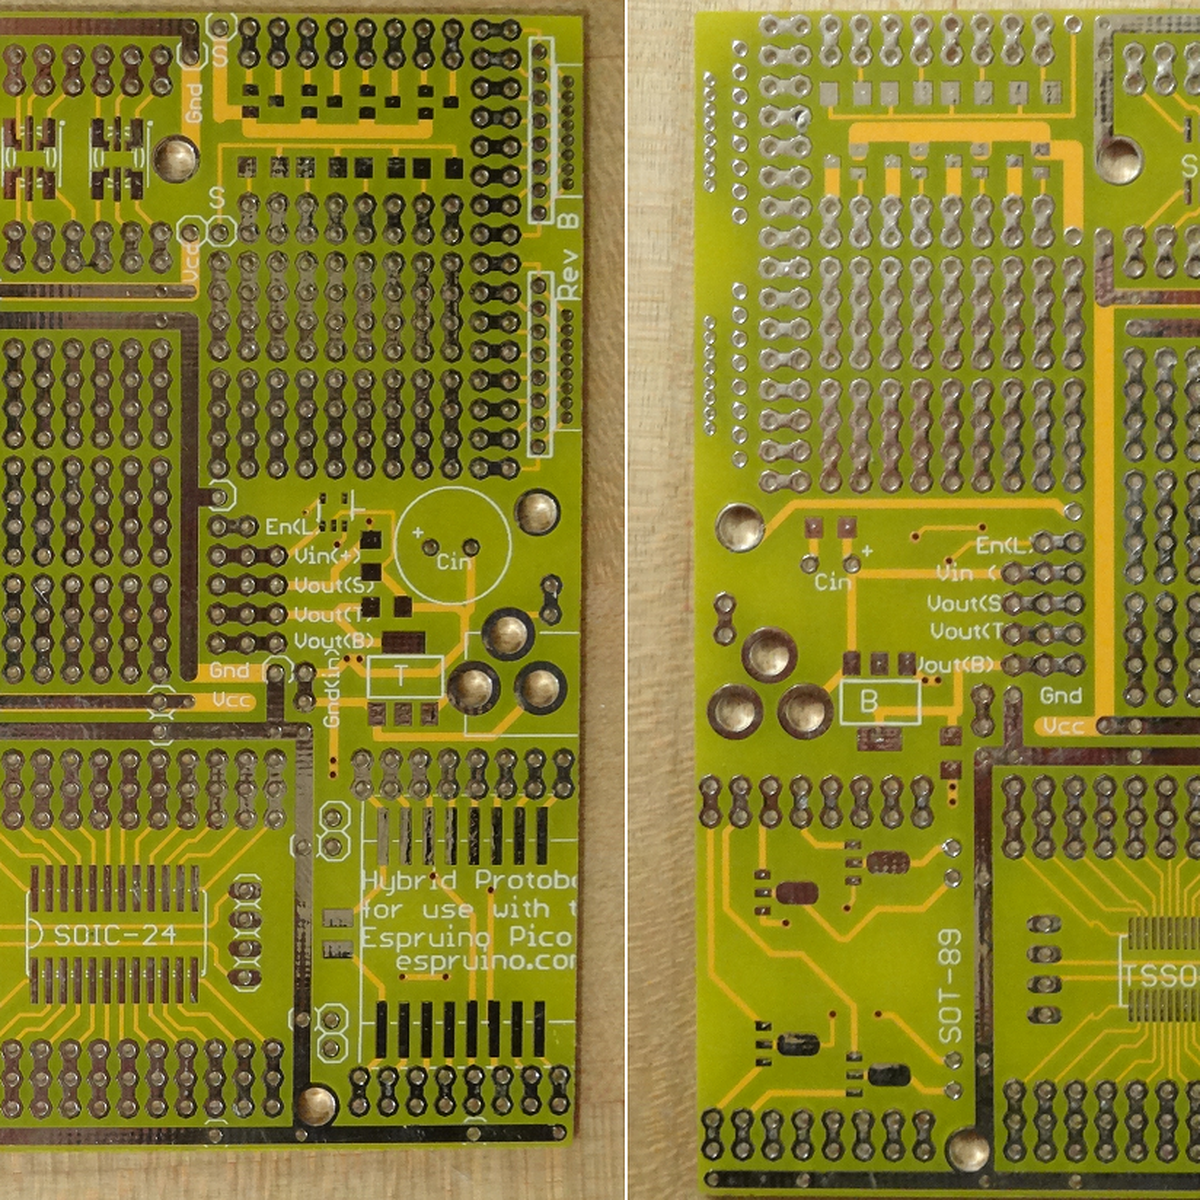 Mint-tin size prototyping board from Azduino by Spence Konde on Tindie